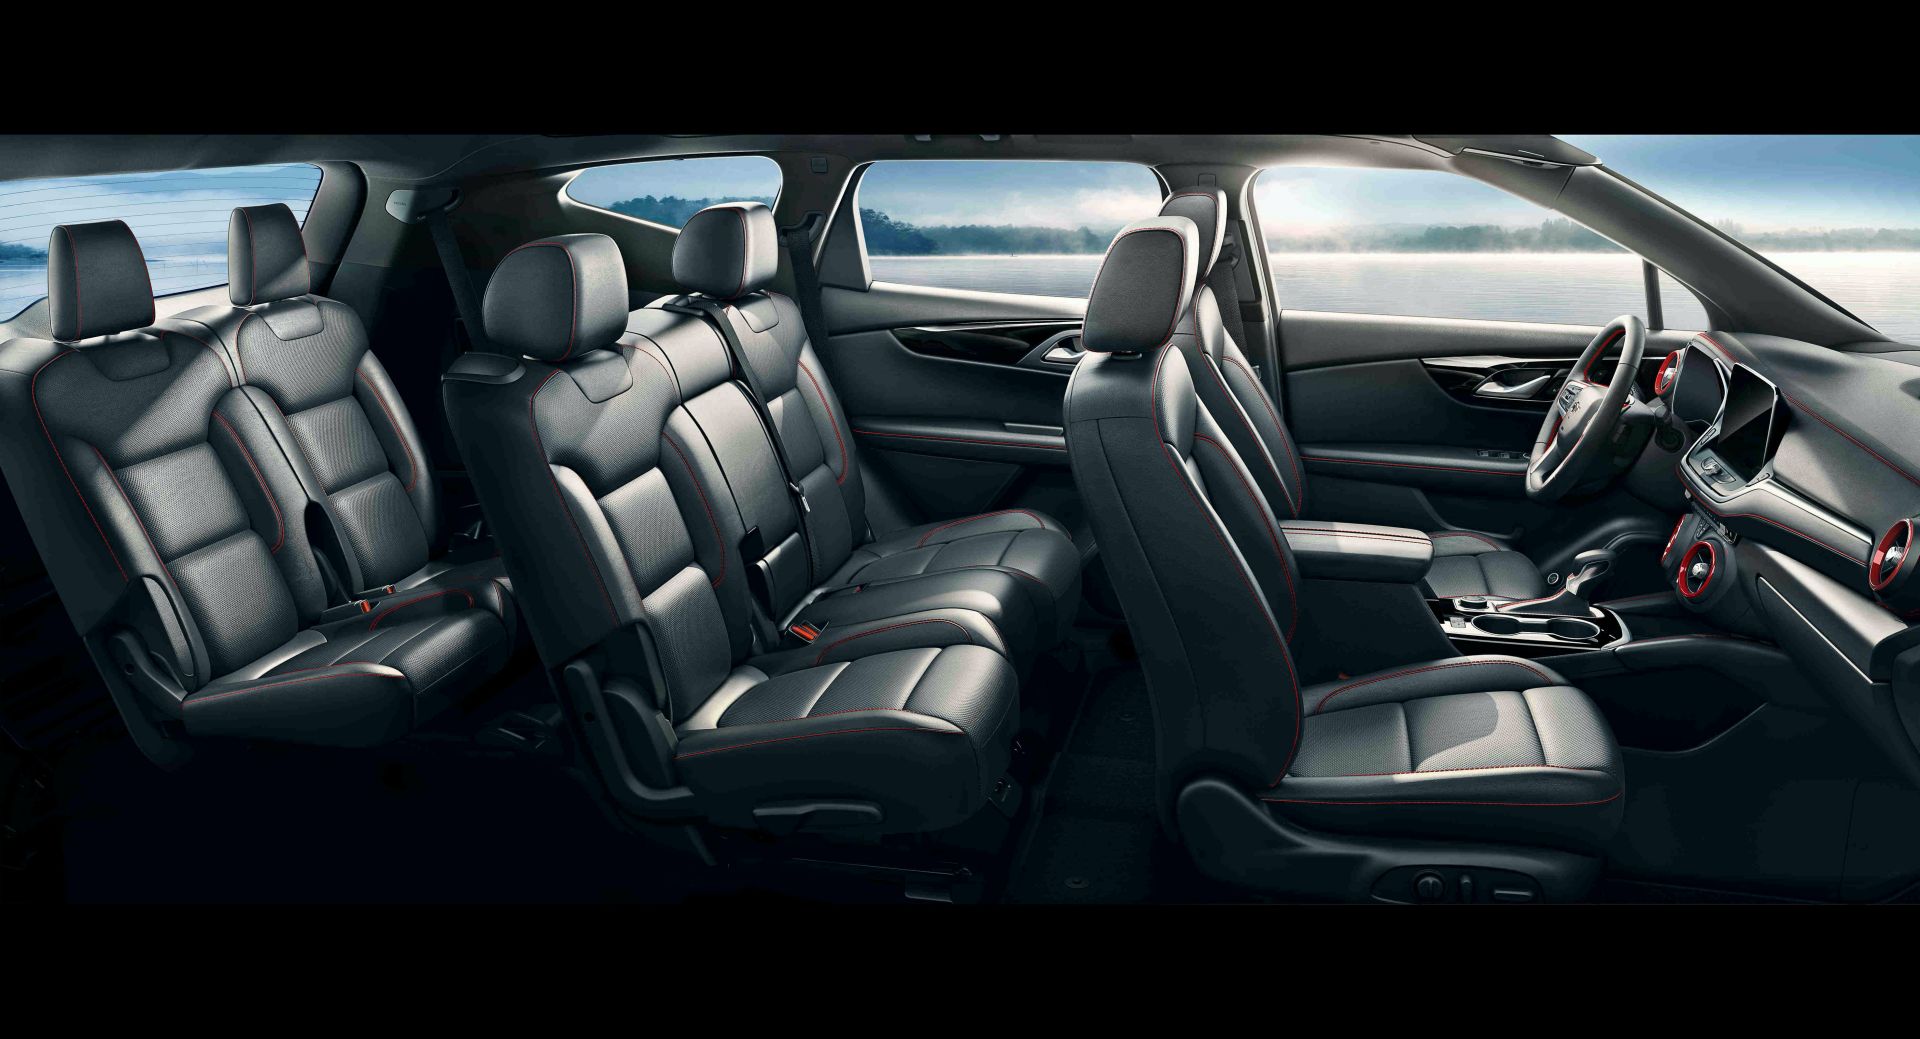 China's 2021 Chevy Blazer Shows Roomier Seven-Seat Interior For The